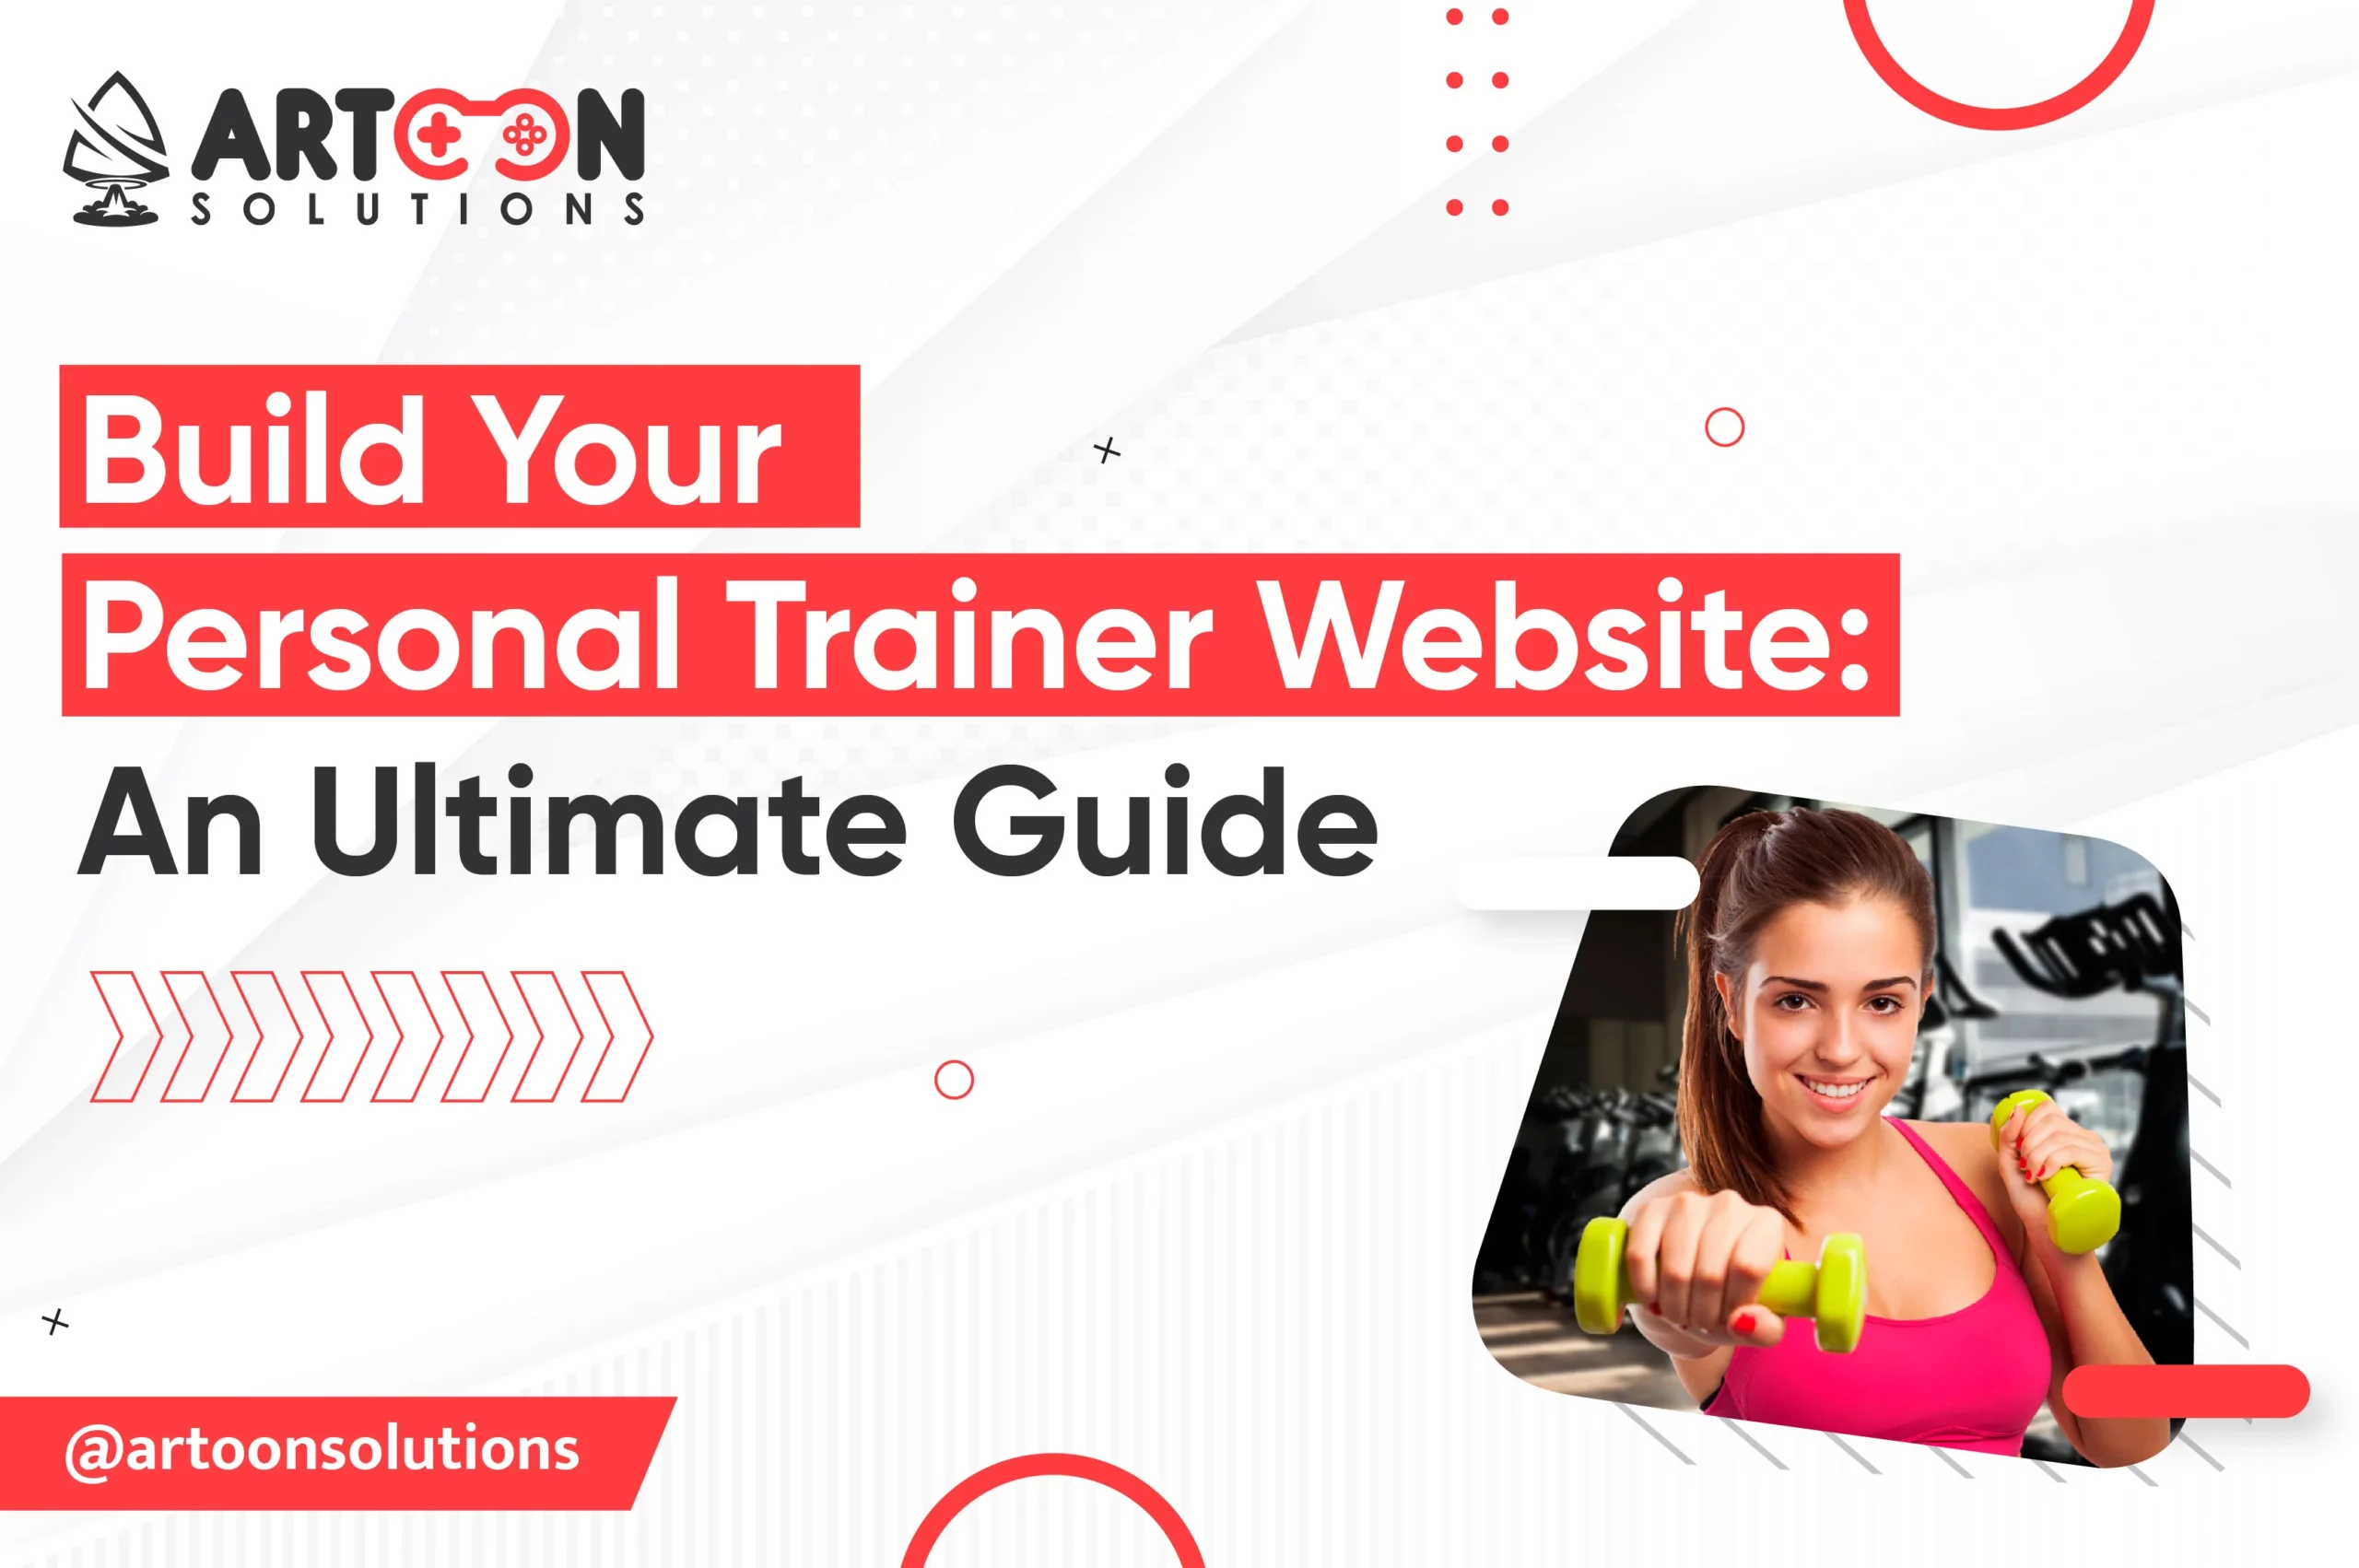 Build Your Personal Trainer Website: An Ultimate Guide